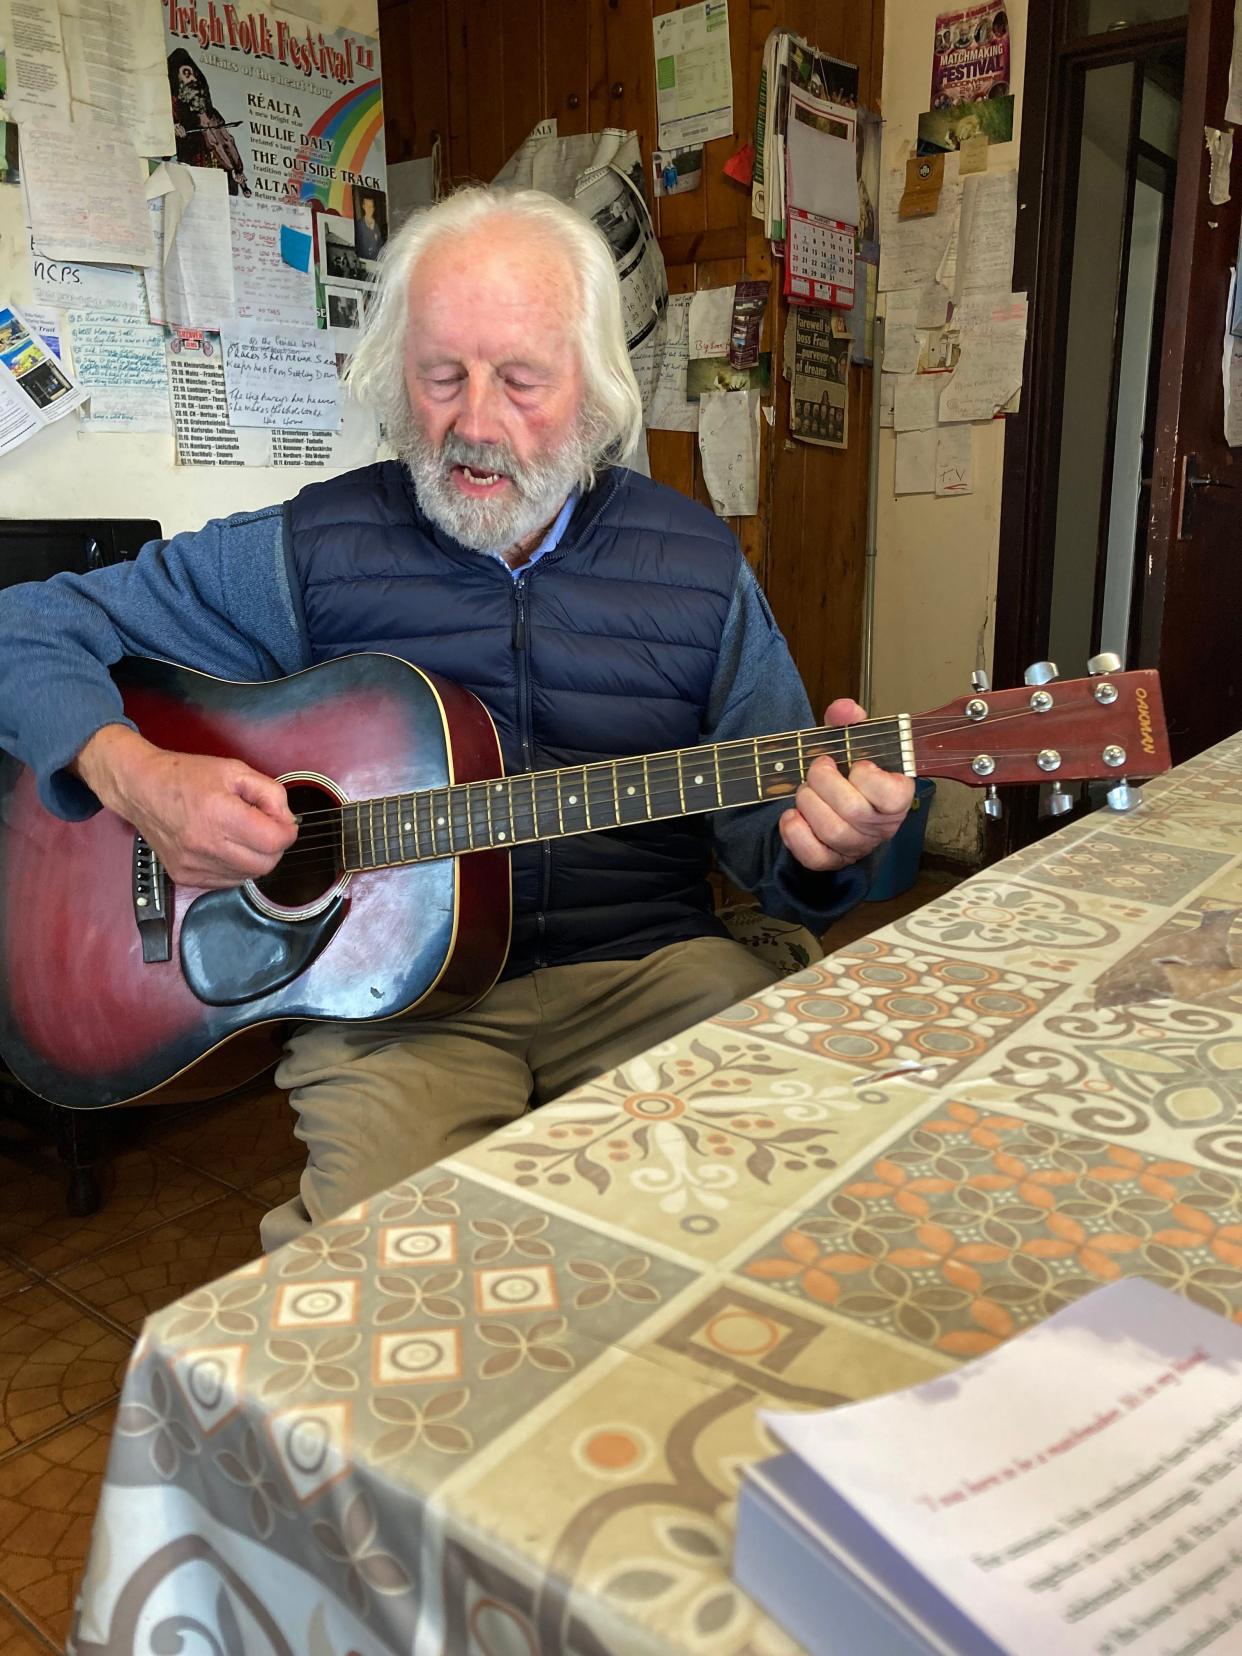 Willy Daly, the best-known of the traditional Irish matchmakers, sits at his kitchen table and sings an Irish ballad.